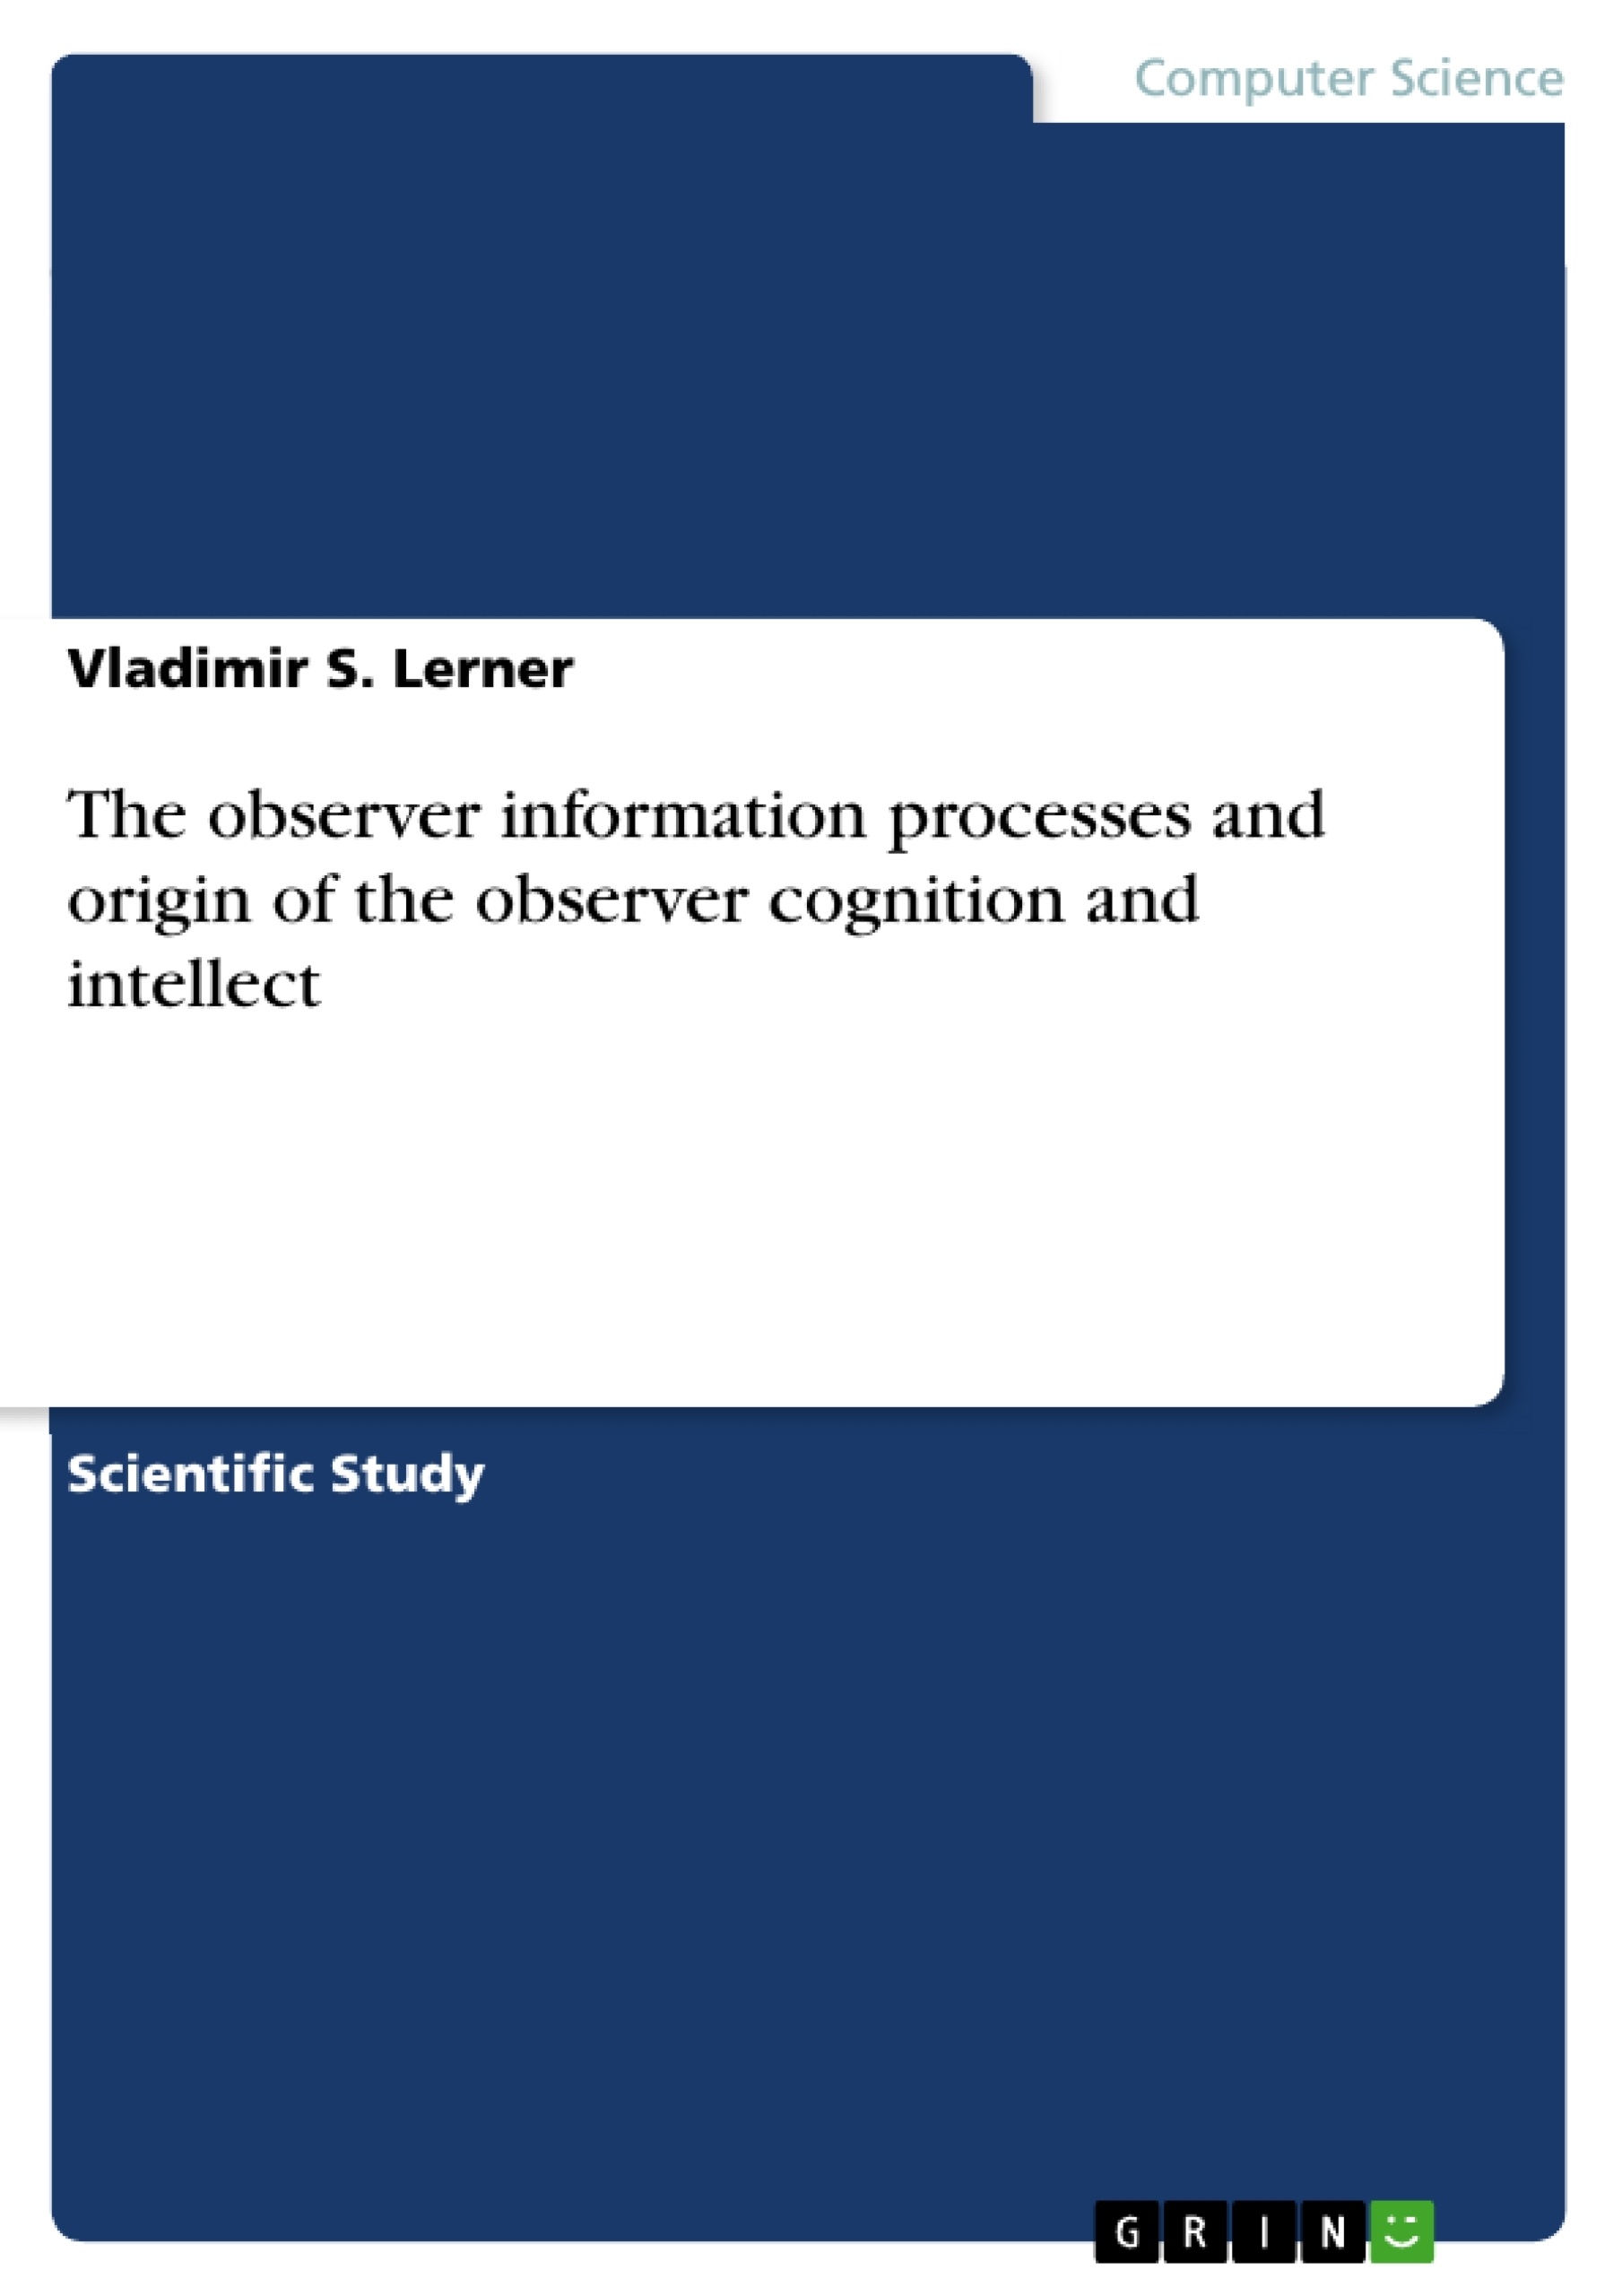 Título: The observer information processes and origin of the observer cognition and intellect